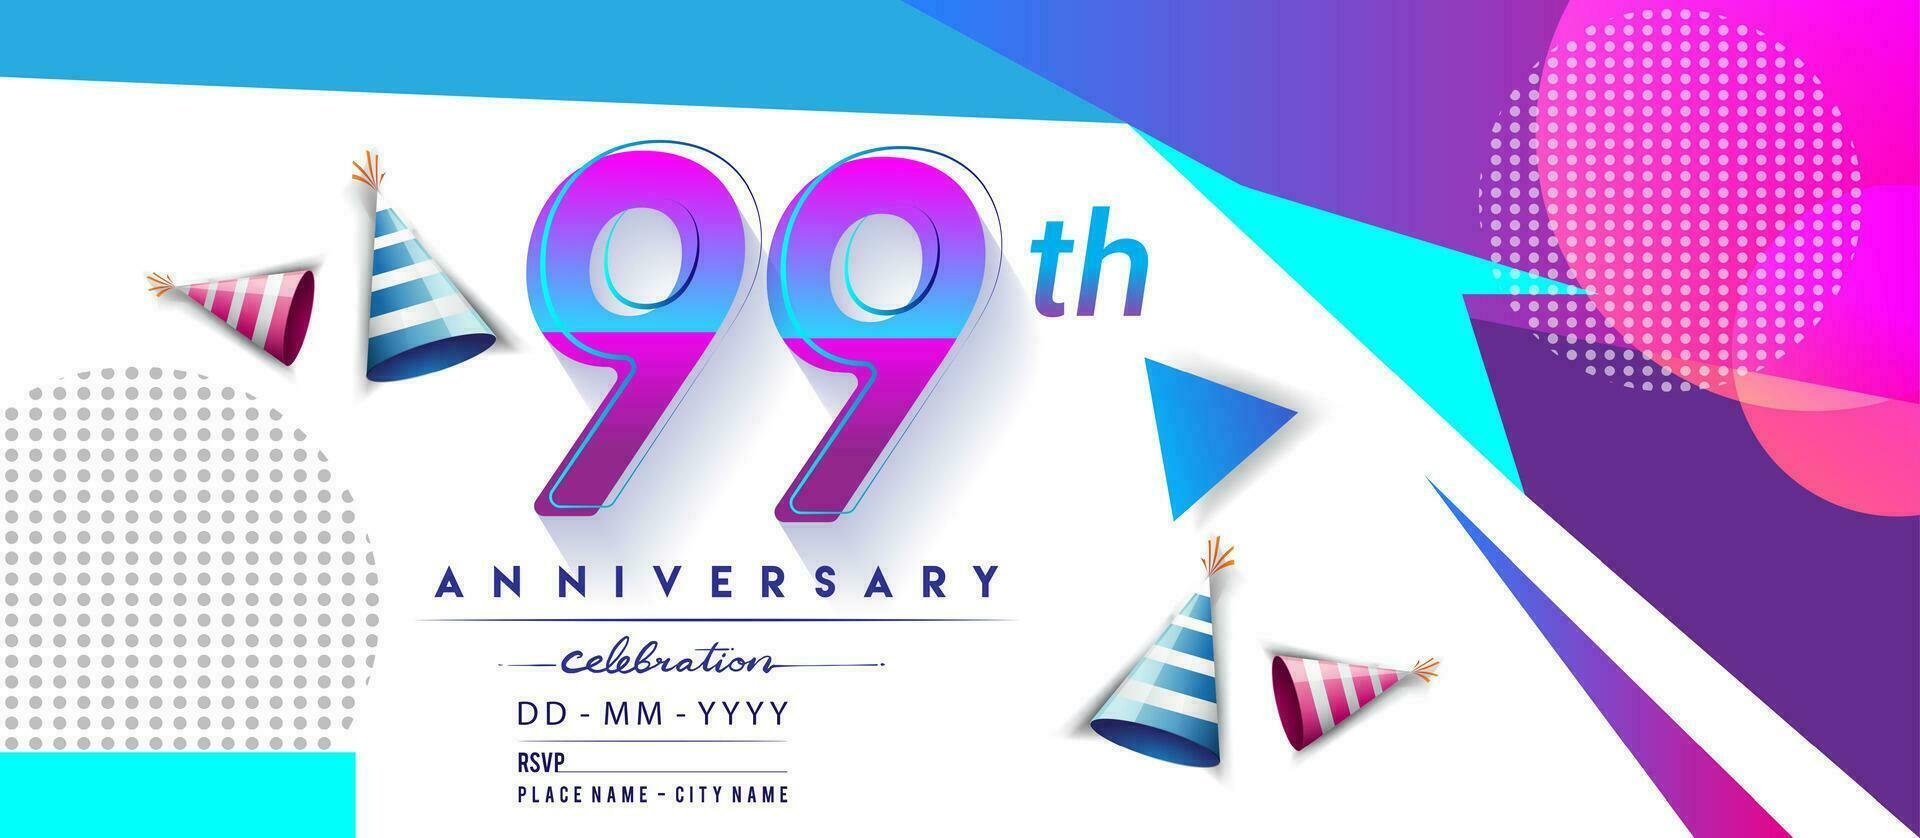 99th years anniversary logo, vector design birthday celebration with colorful geometric background and circles shape.